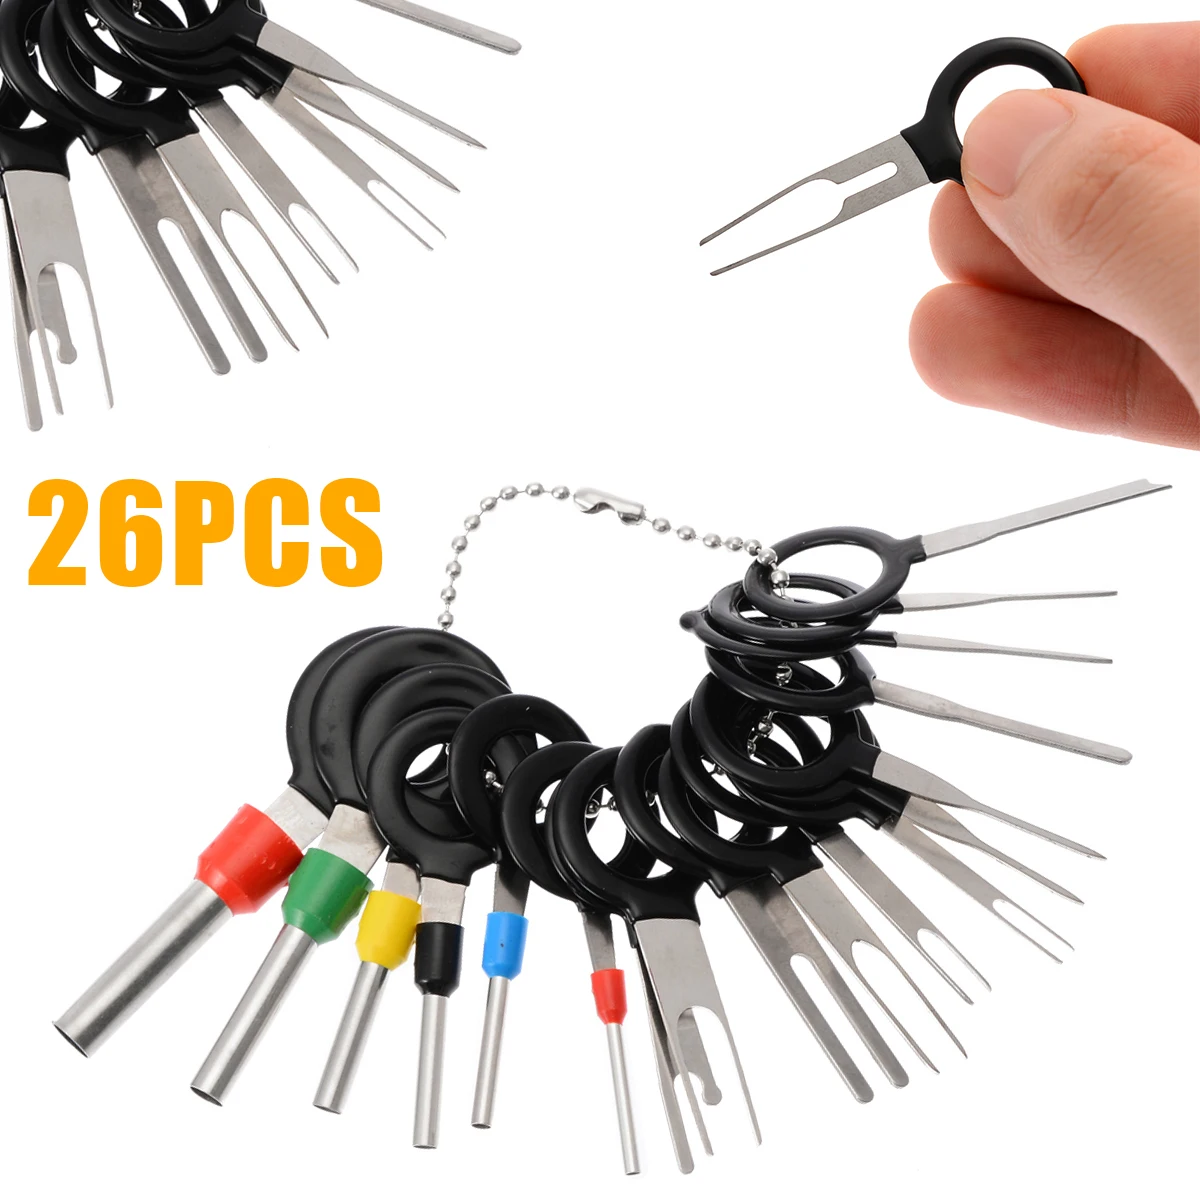 

26pcs Automotive Plug Wiring Harness Terminal Remove Tool Set Key Pin Car Electrical Wire Crimp Connector Extractor Kit